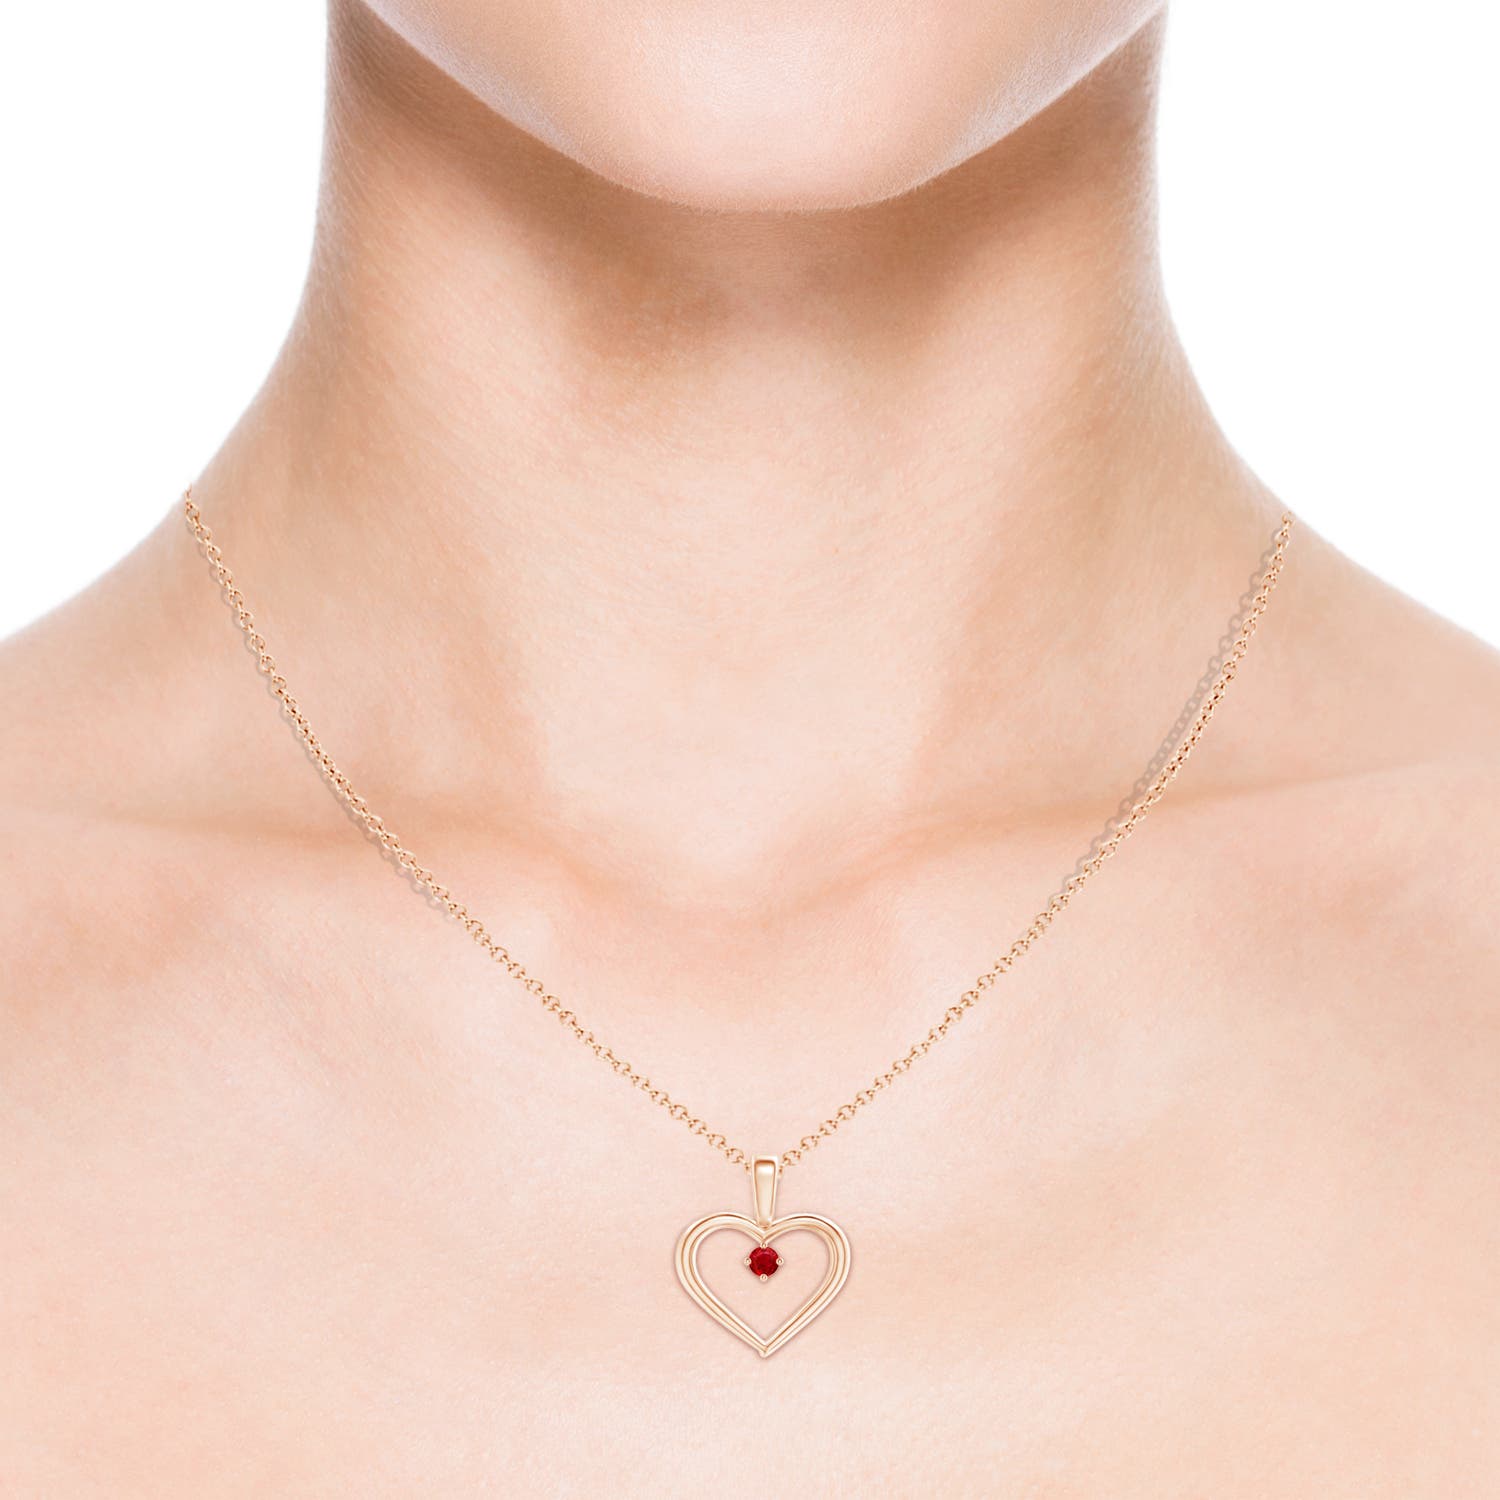 AAA - Ruby / 0.09 CT / 14 KT Rose Gold